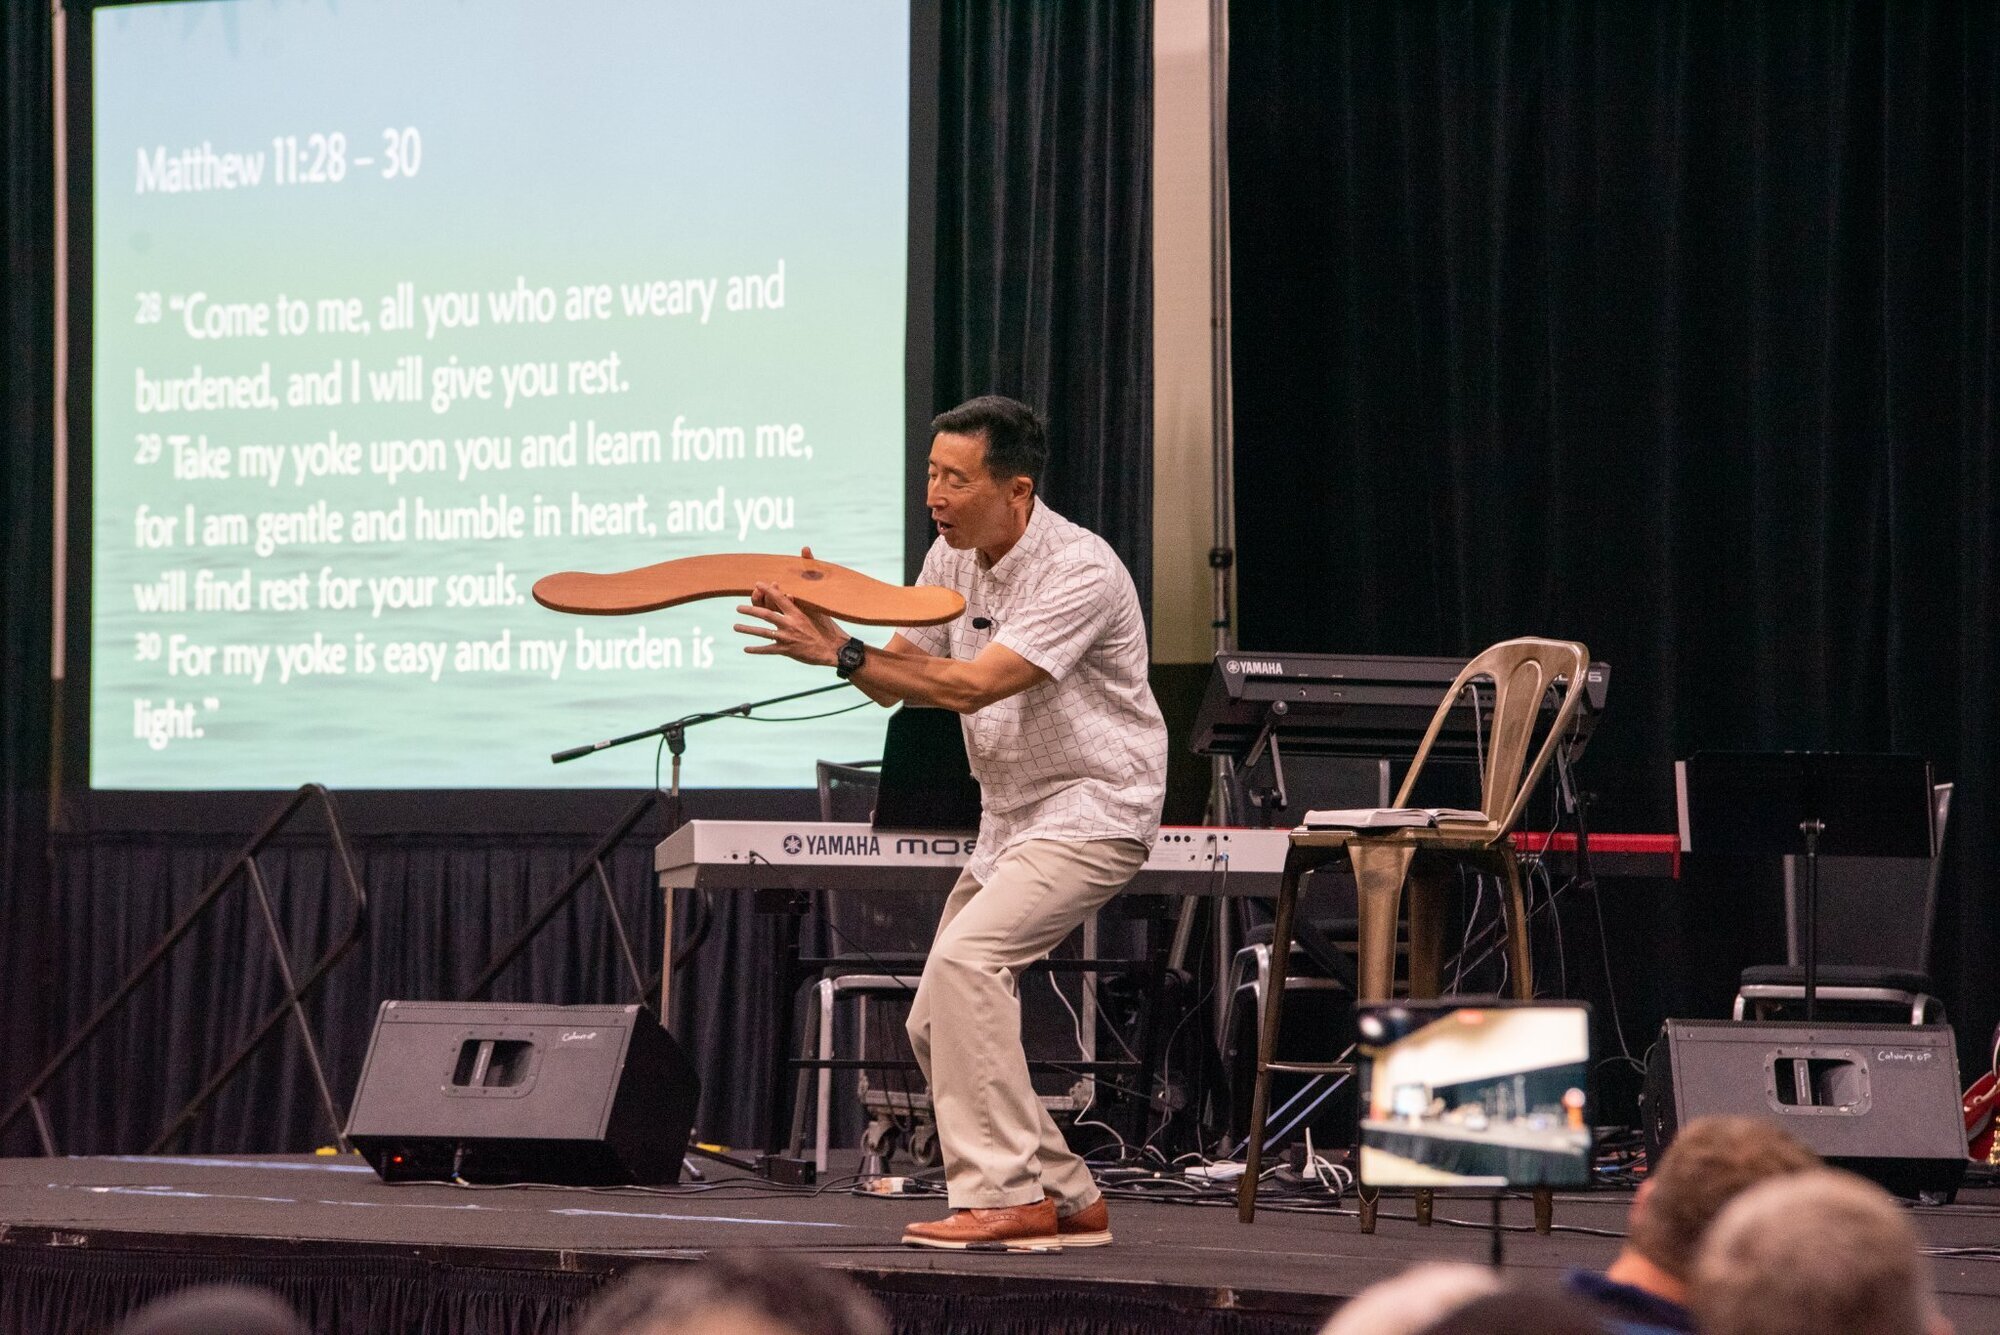 Image of an Asian man speaking on stage with a wooden object in his hands